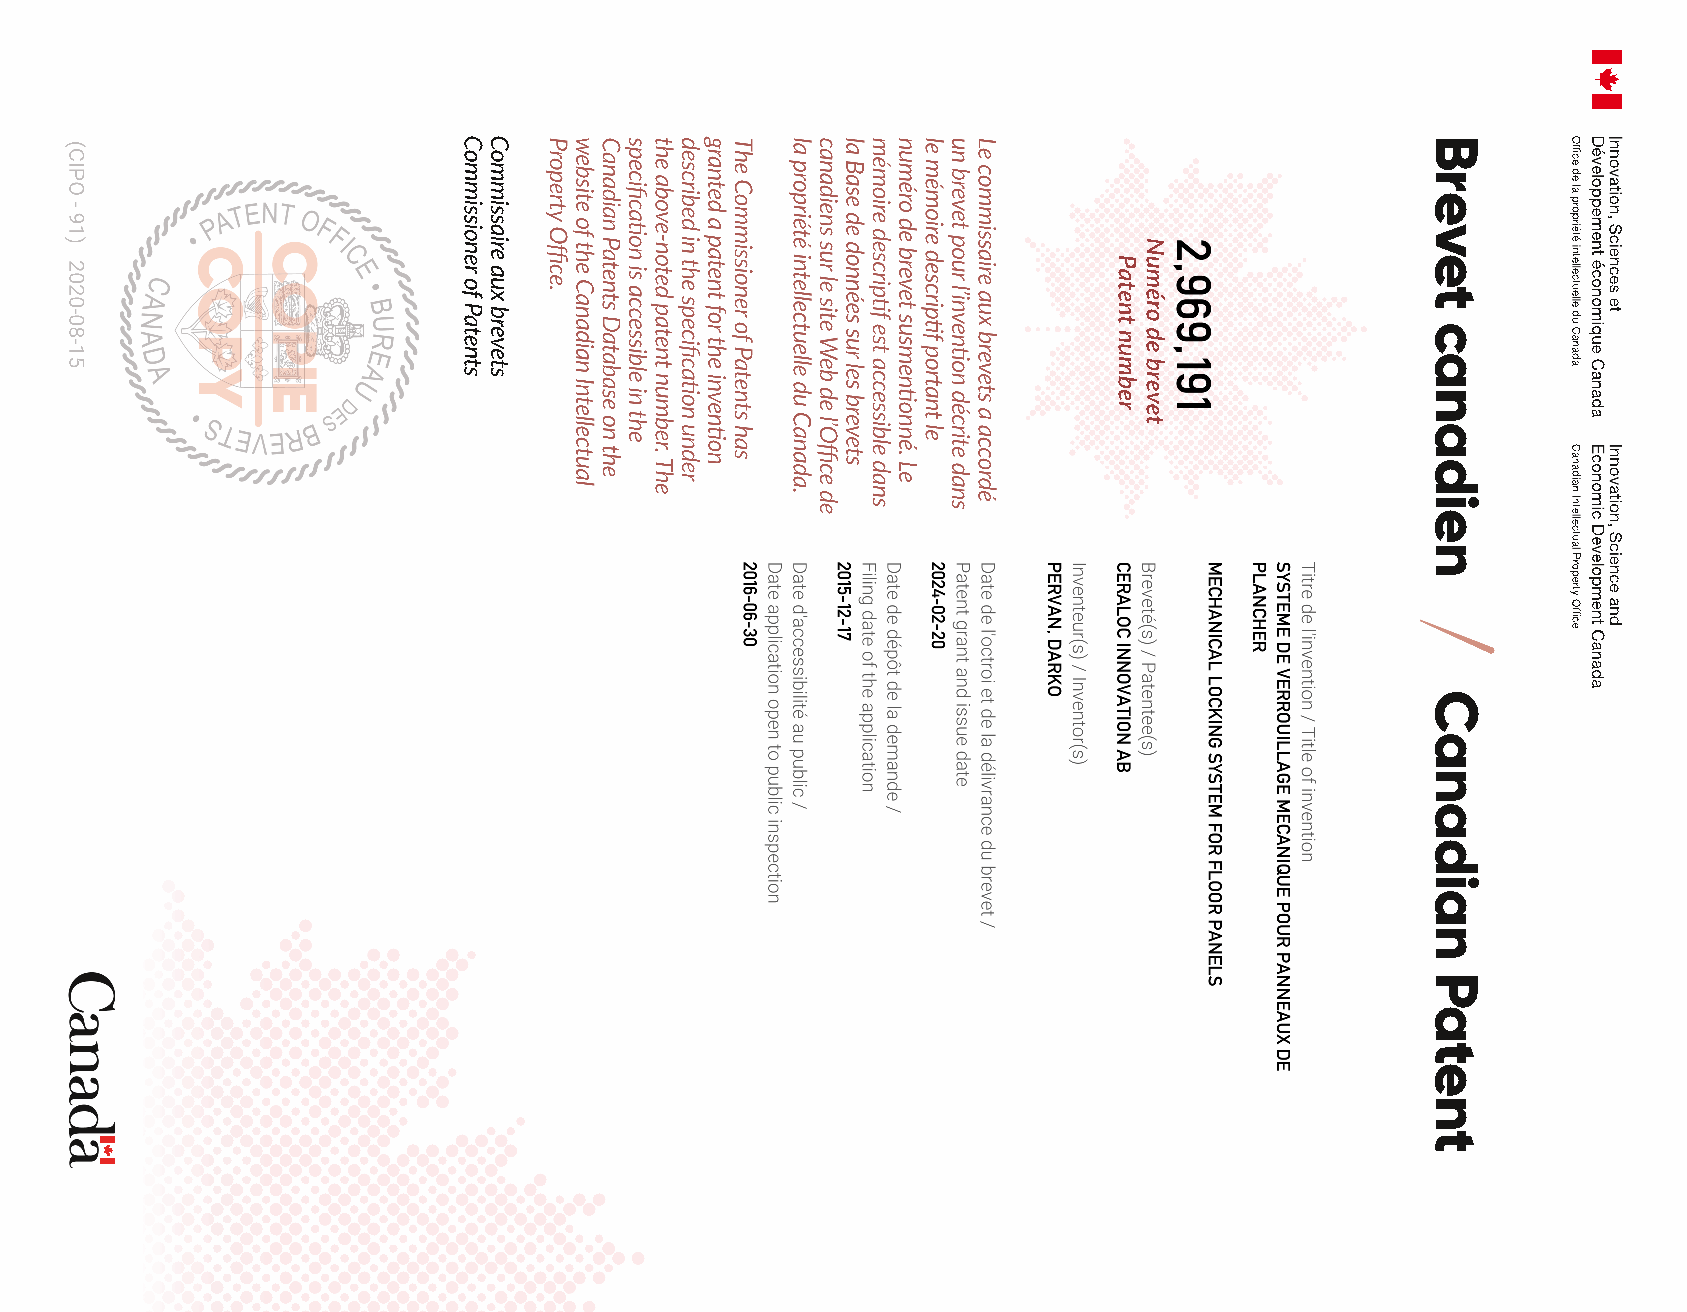 Canadian Patent Document 2969191. Electronic Grant Certificate 20240220. Image 1 of 1